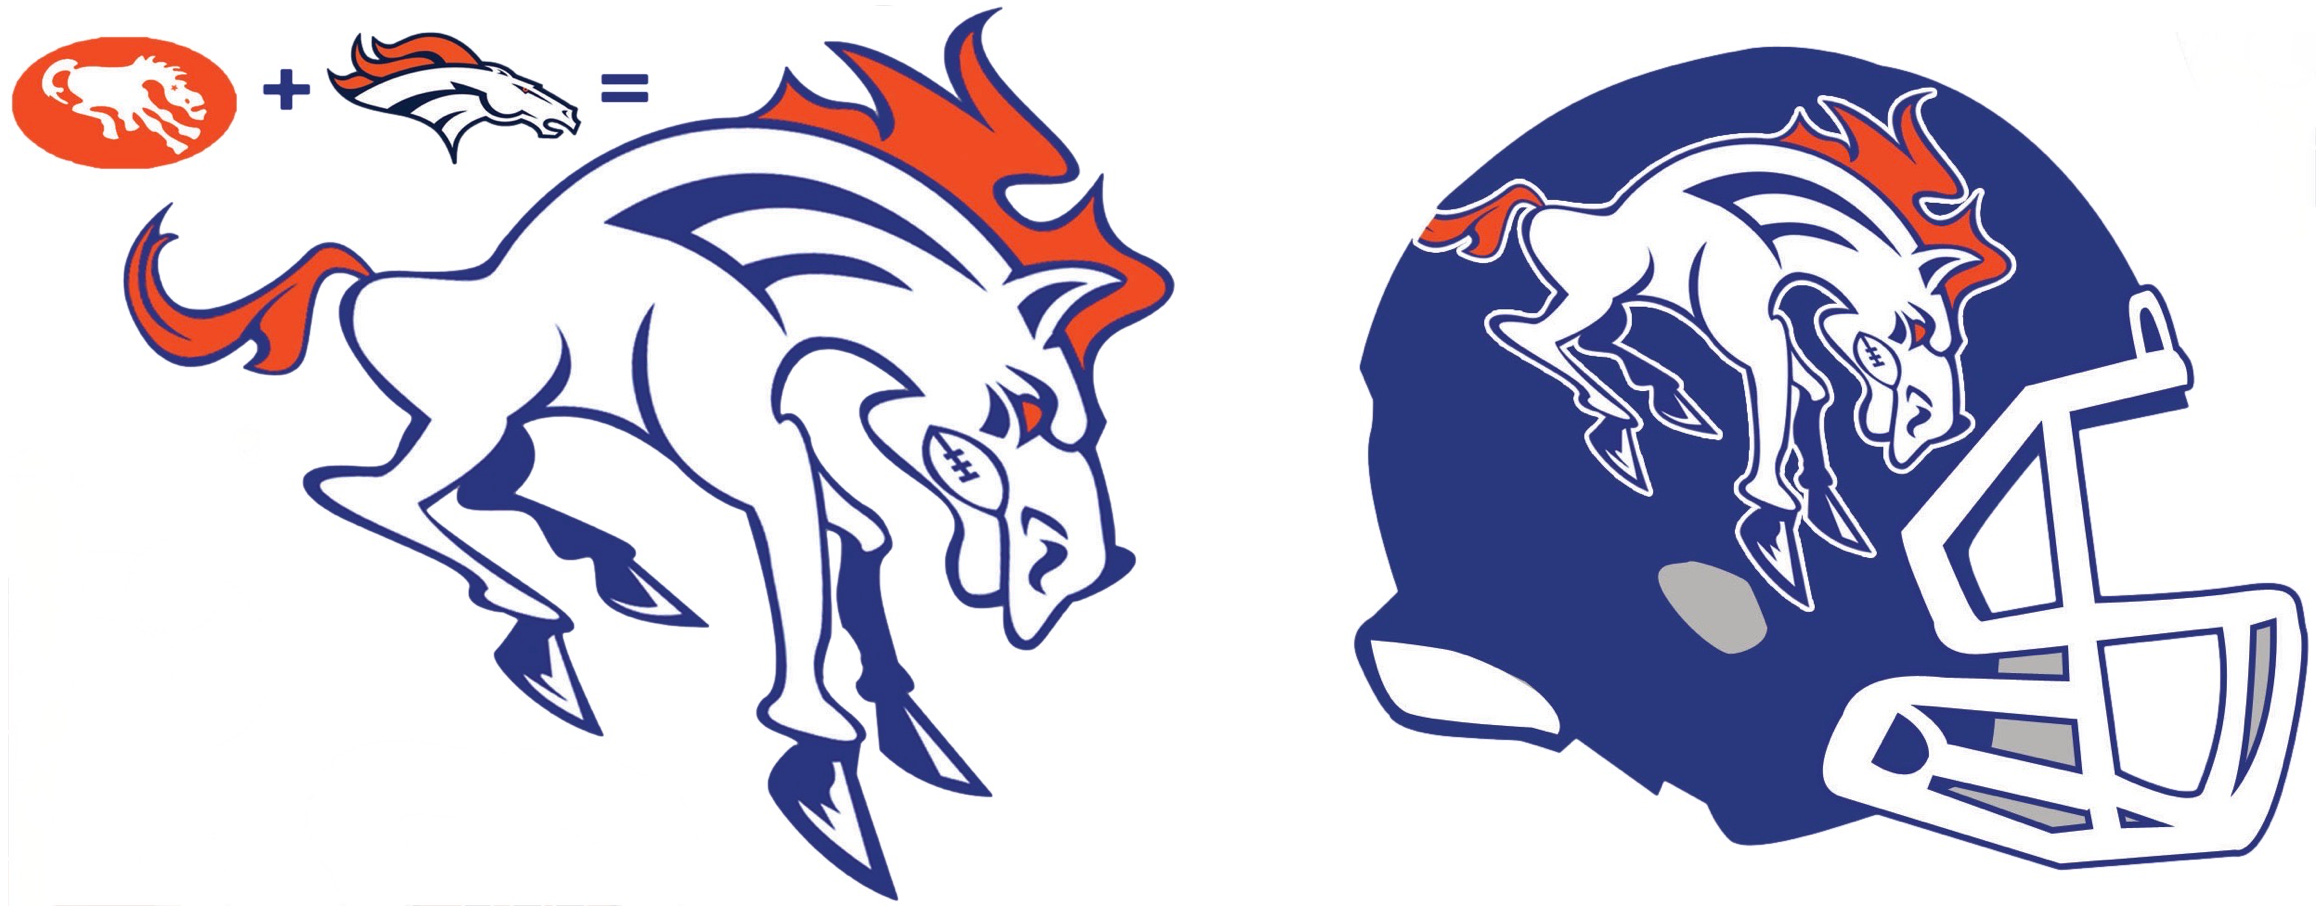 Broncos-Redesign Contest Results - by Paul Lukas